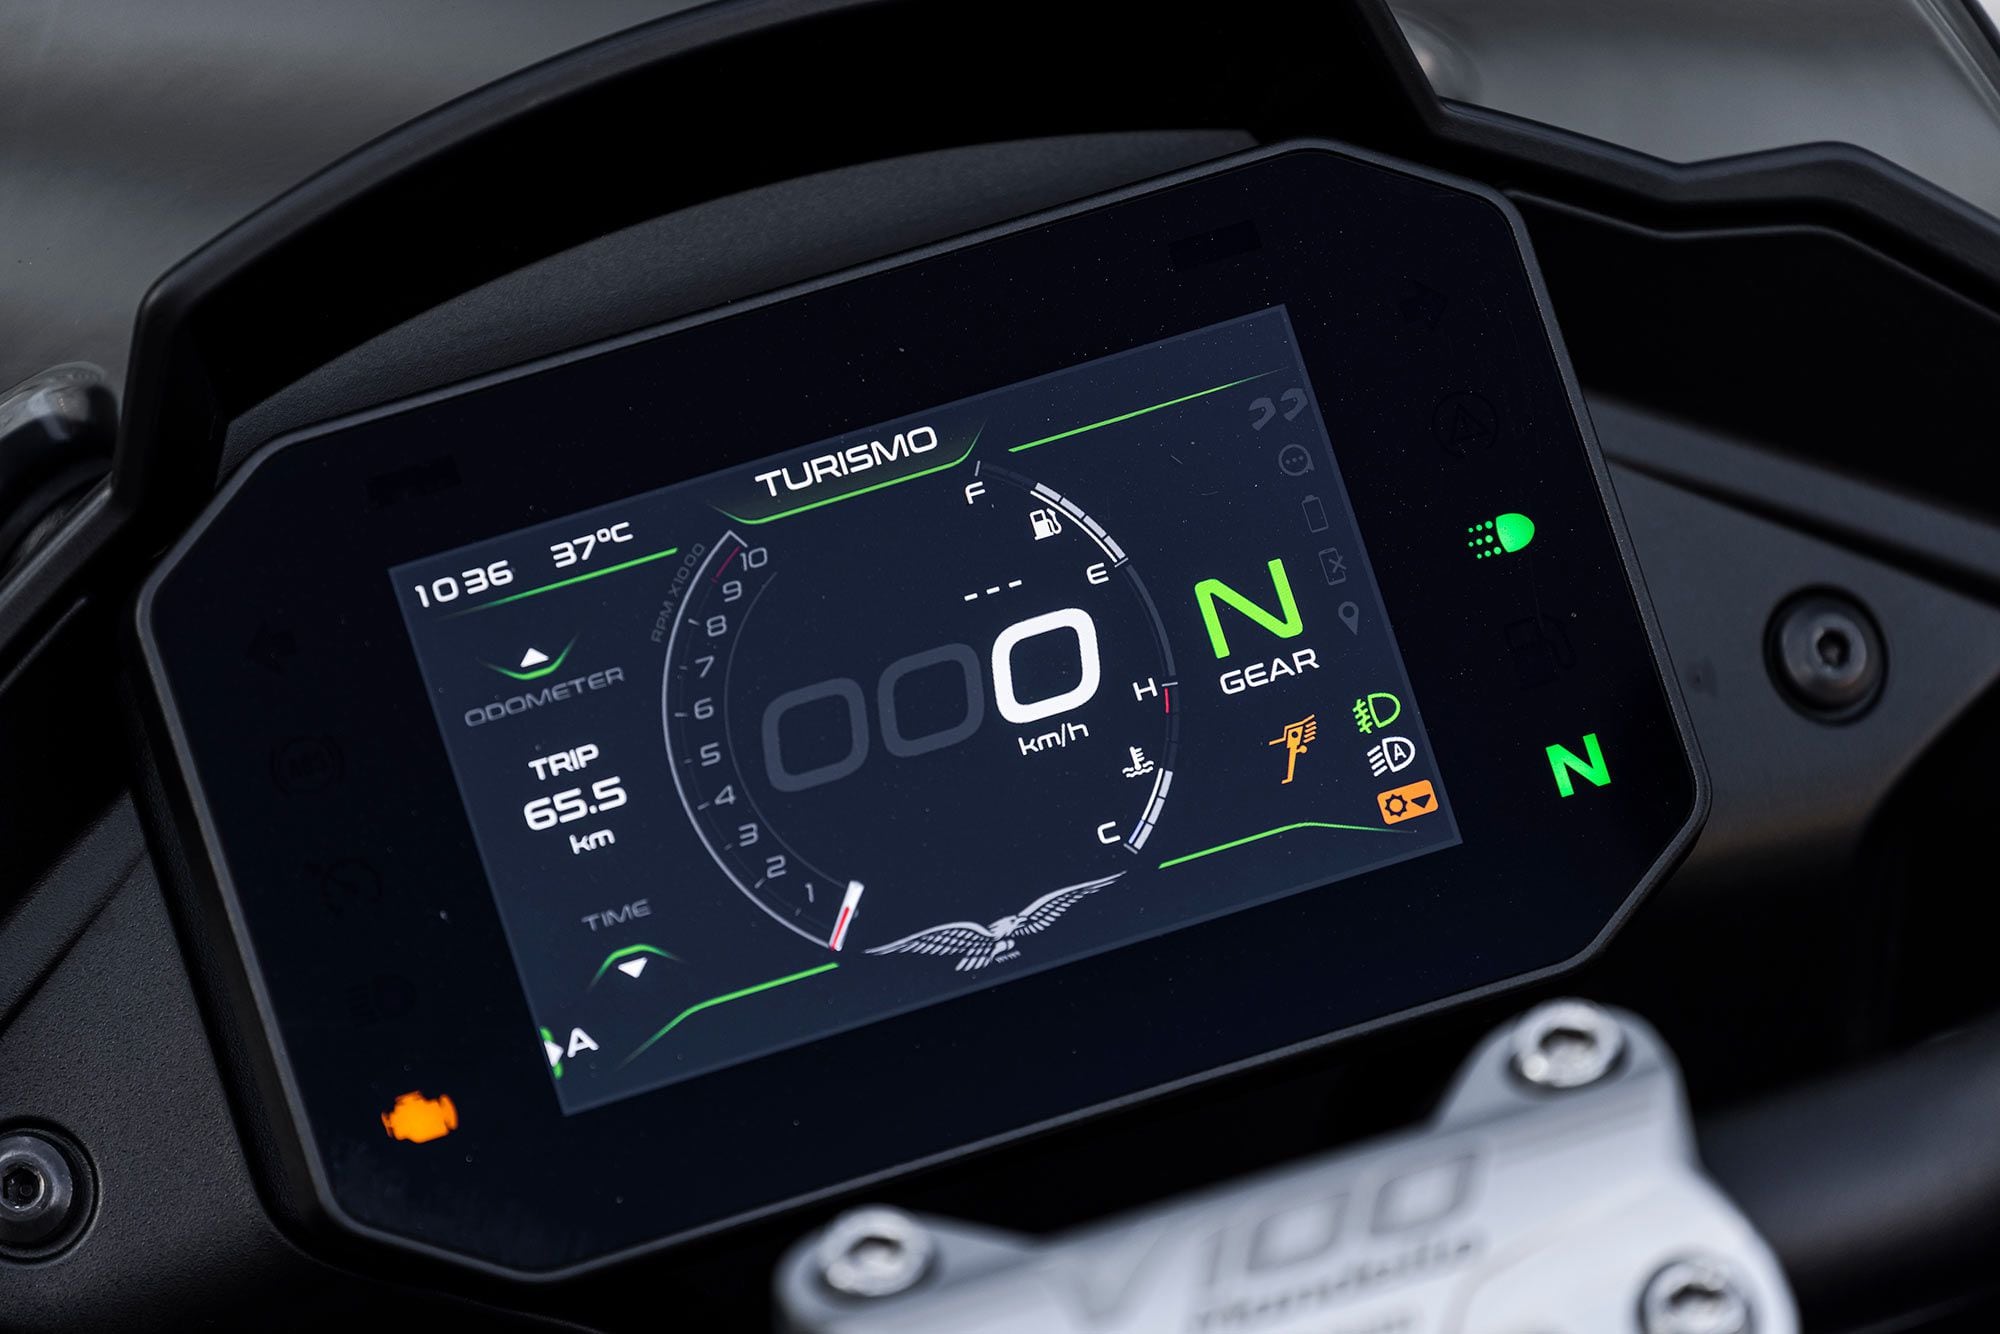 The Moto Guzzi Mandello V100 S gets the same 5-inch color TFT display that the Piaggio Group uses on its other bikes, including the Aprilia RSV4. It’s a much improved setup with a pleasing user interface.